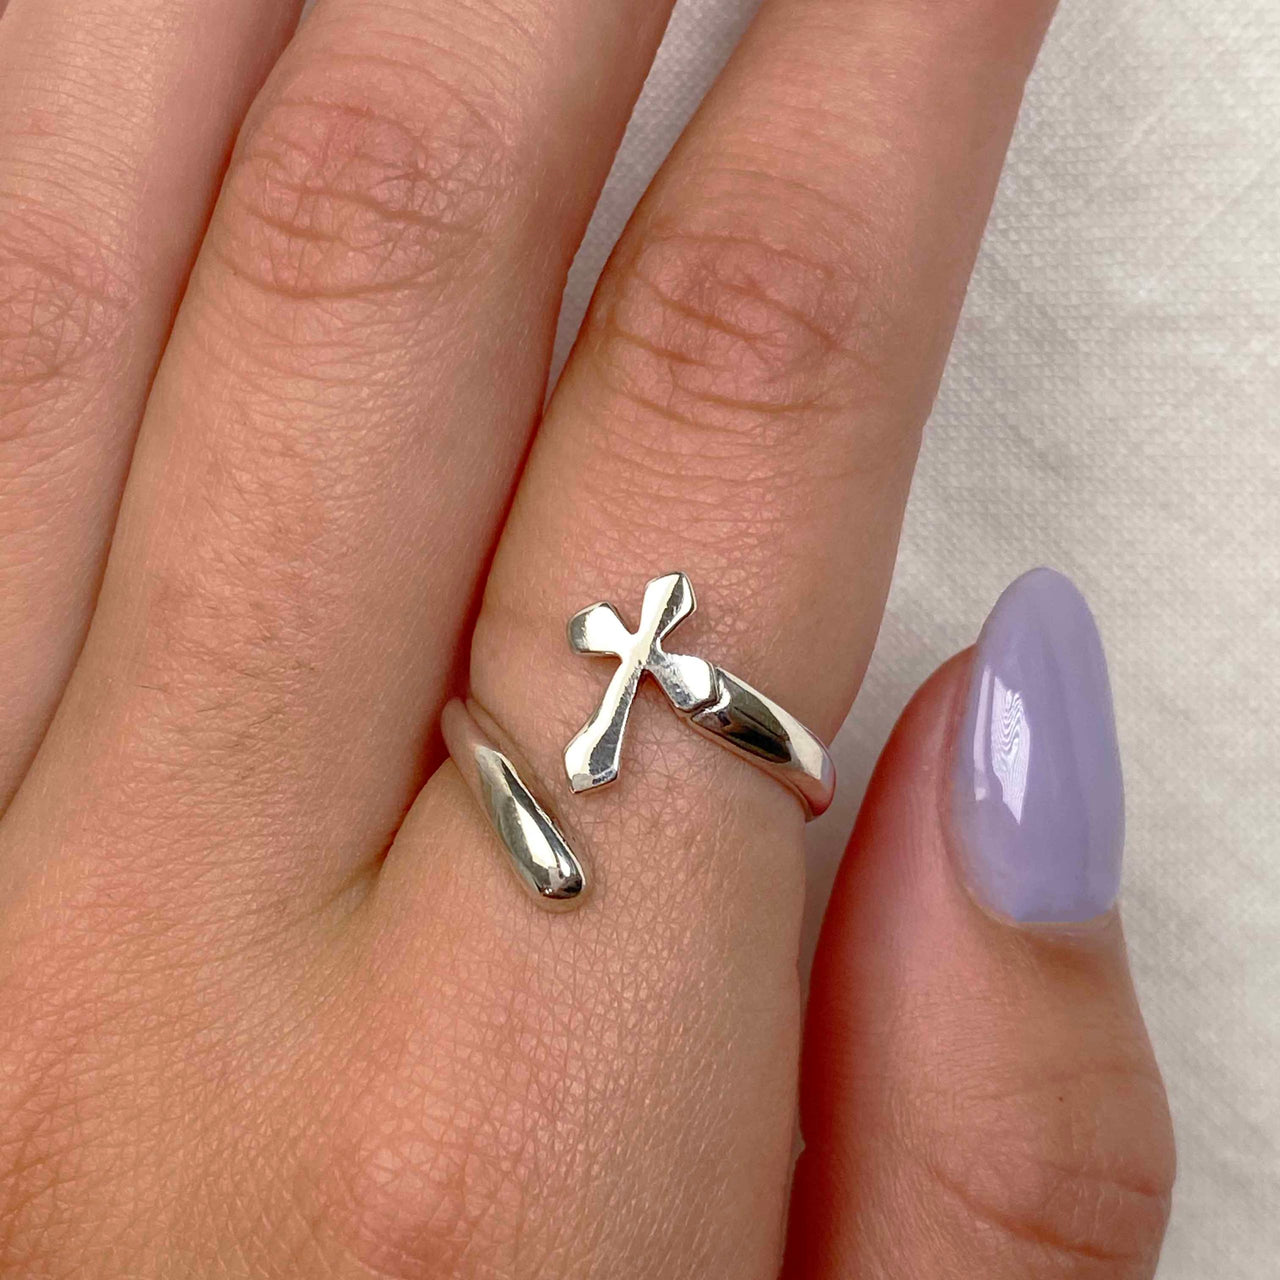 Calvary Cross Ring Sterling Silver Jewelry